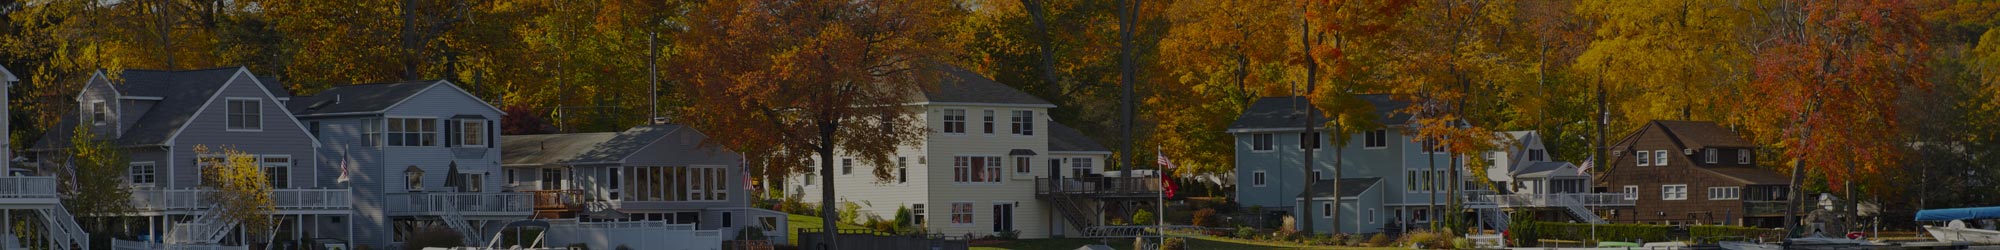 property management companies in ct